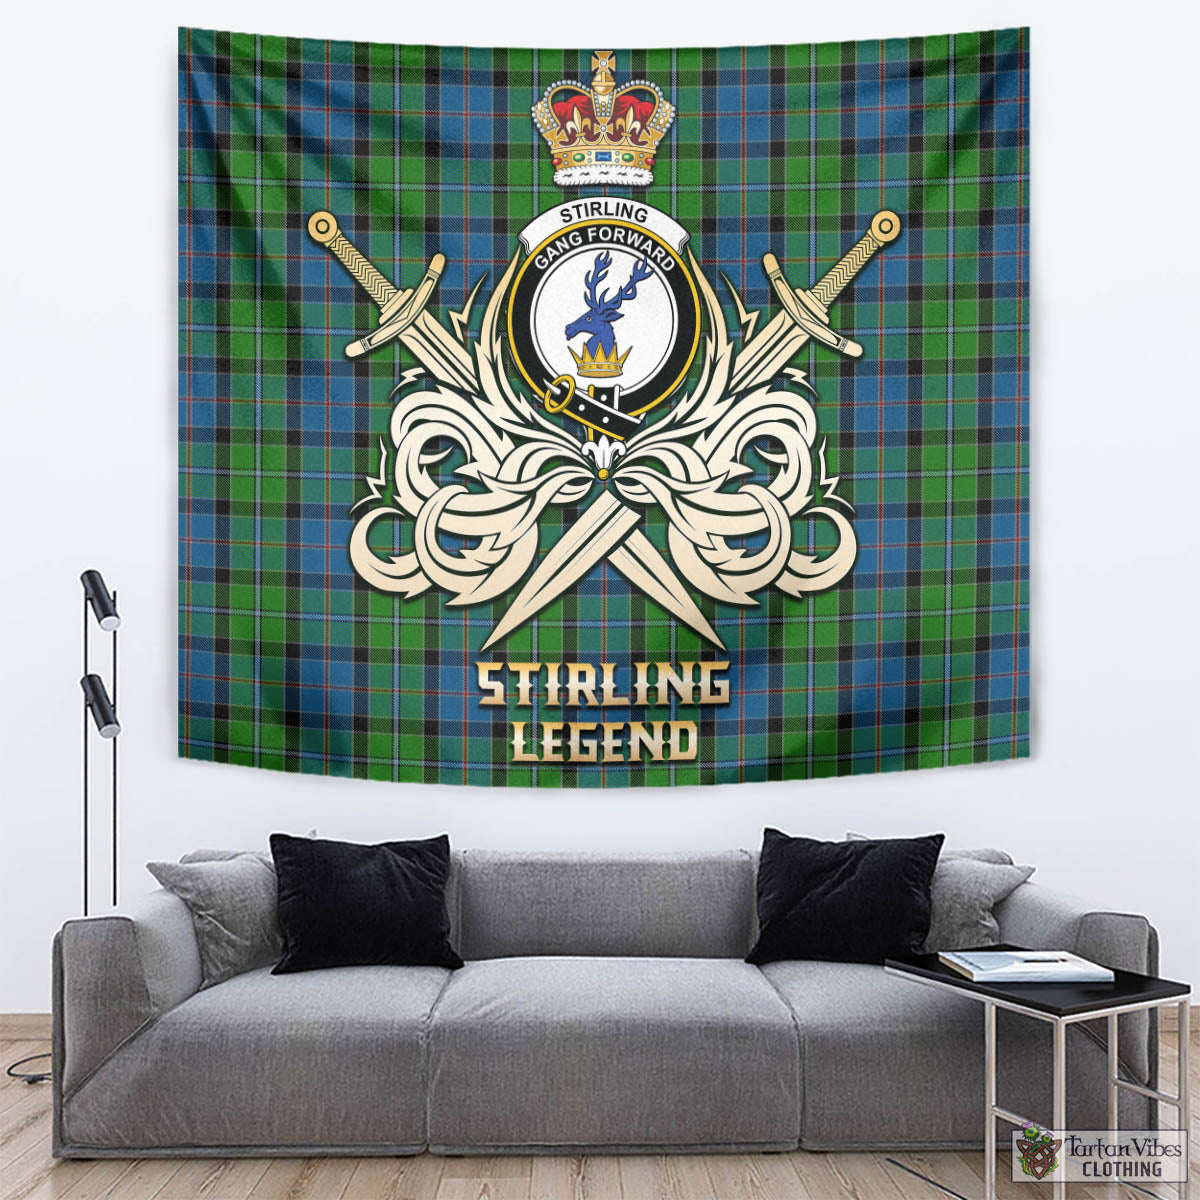 Tartan Vibes Clothing Stirling Tartan Tapestry with Clan Crest and the Golden Sword of Courageous Legacy